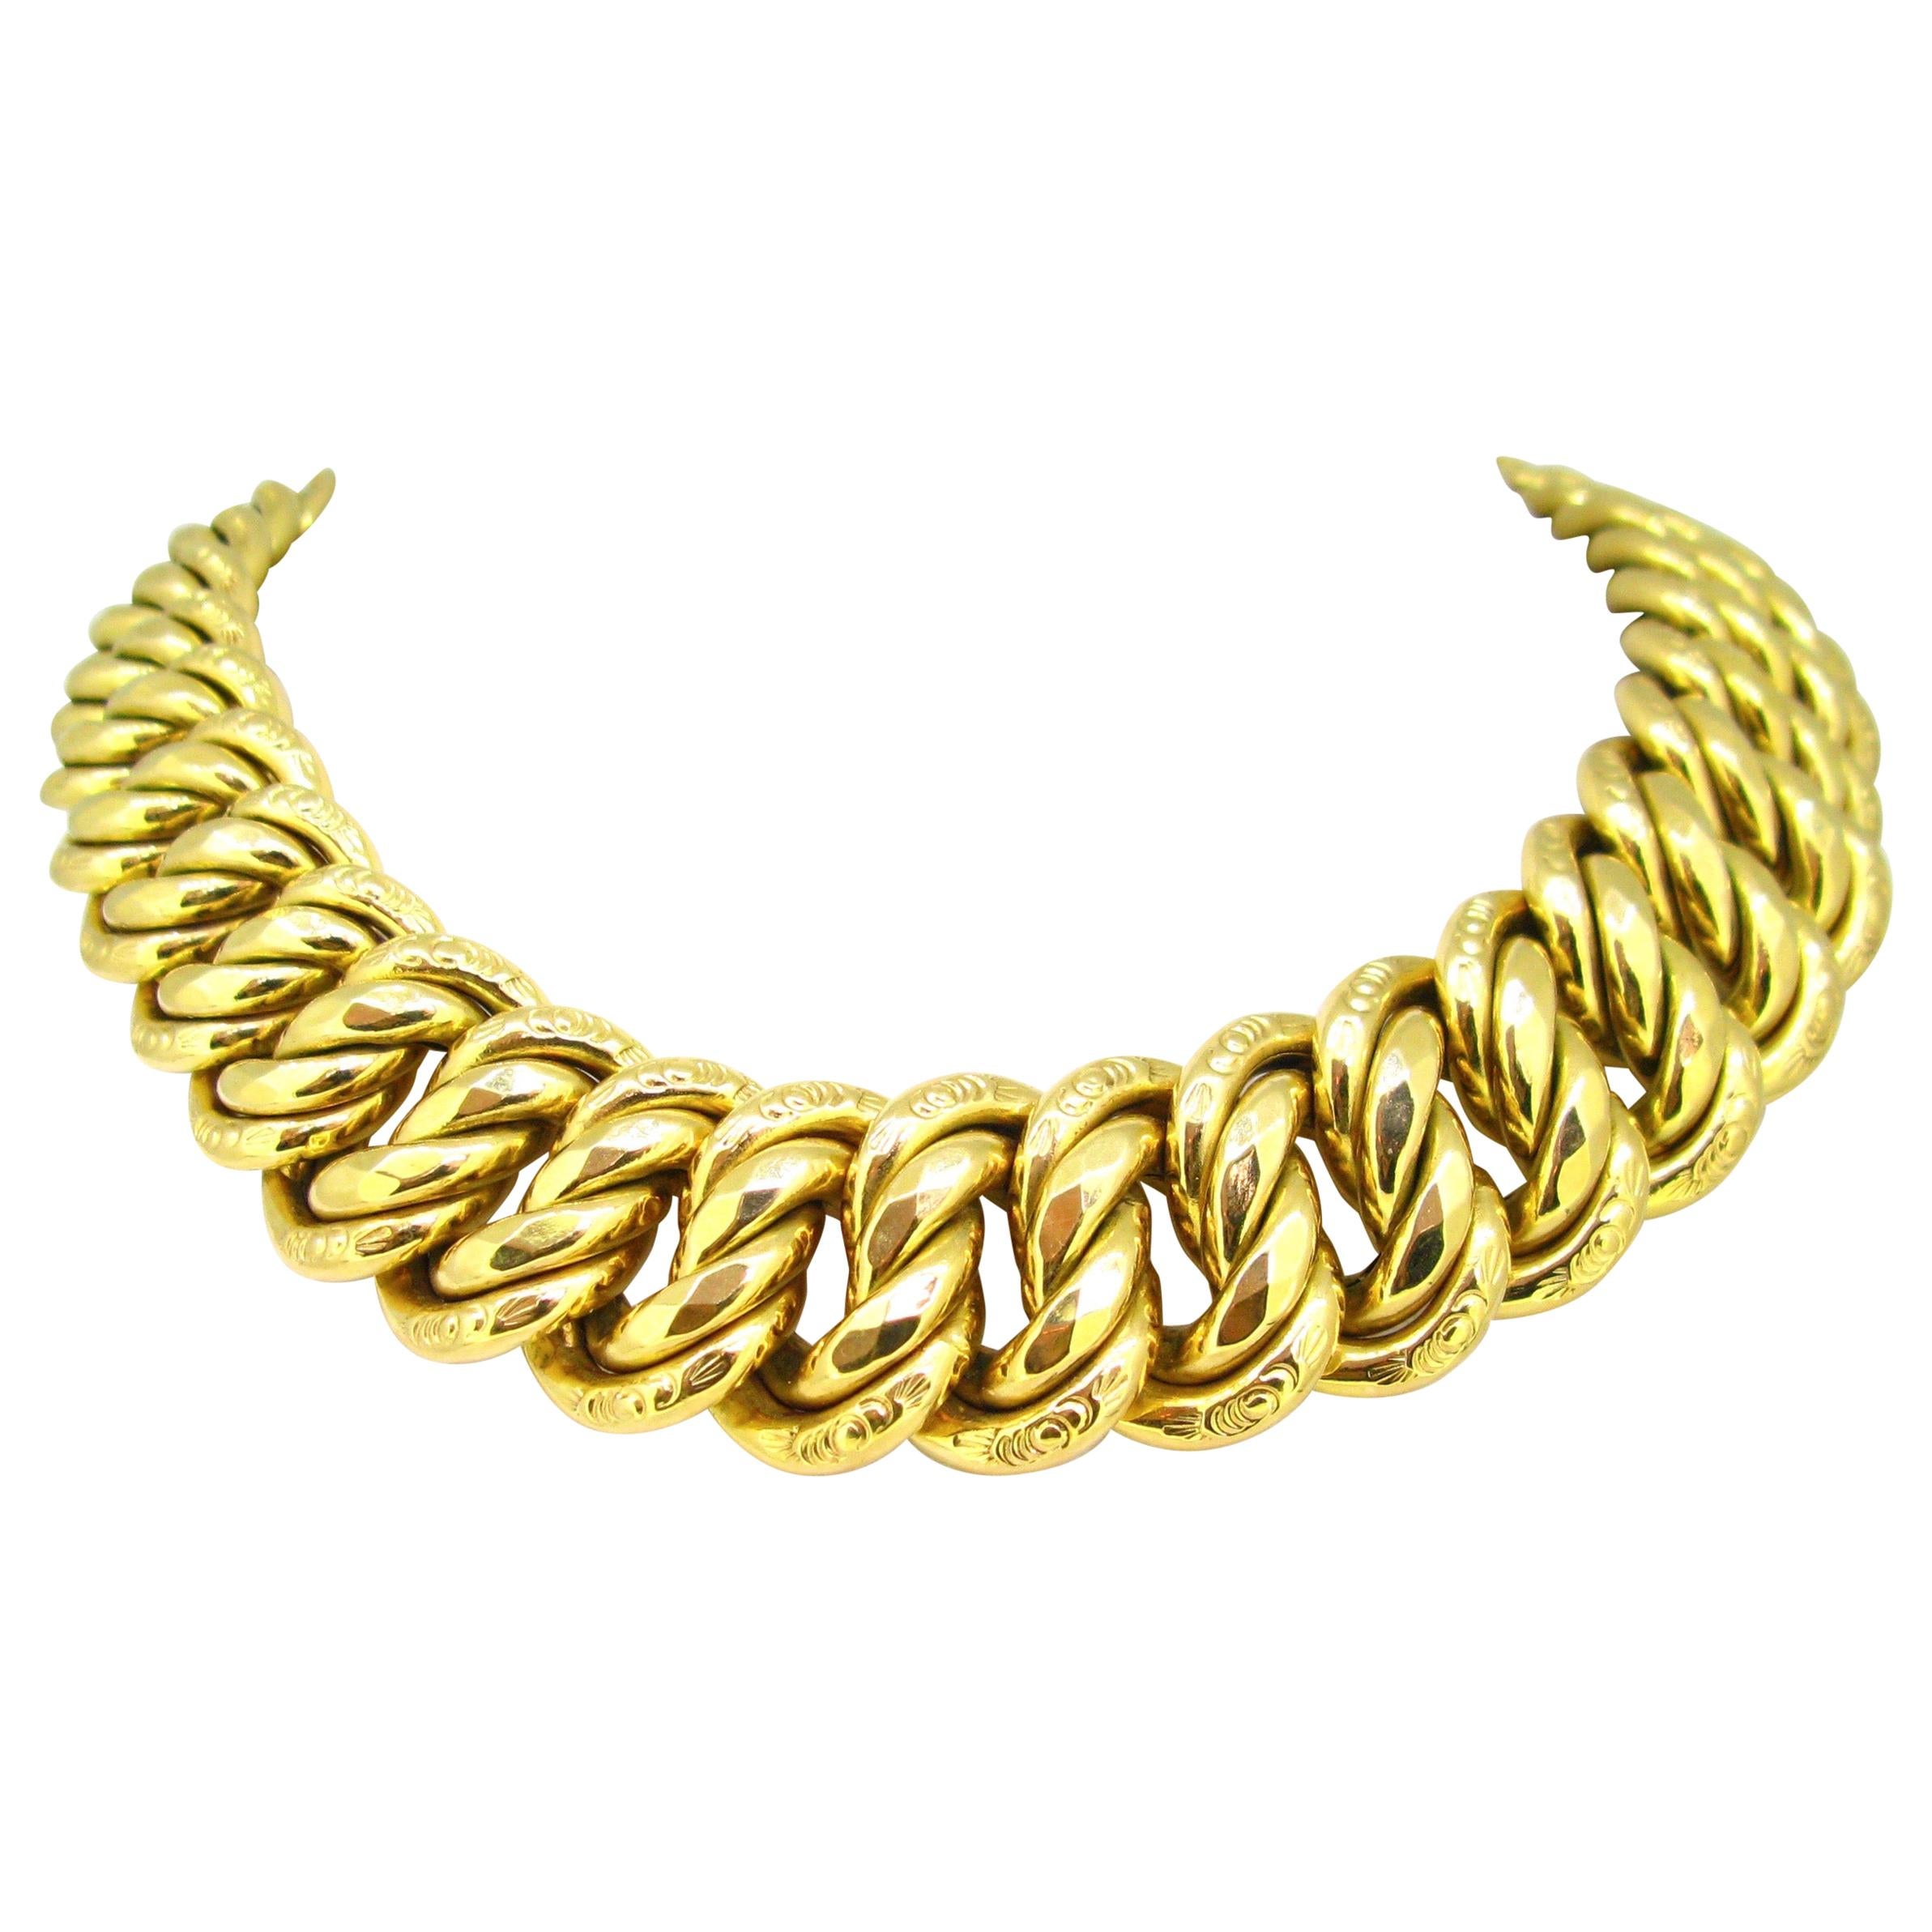 Chunky Graded American Links Gold Necklace Choker